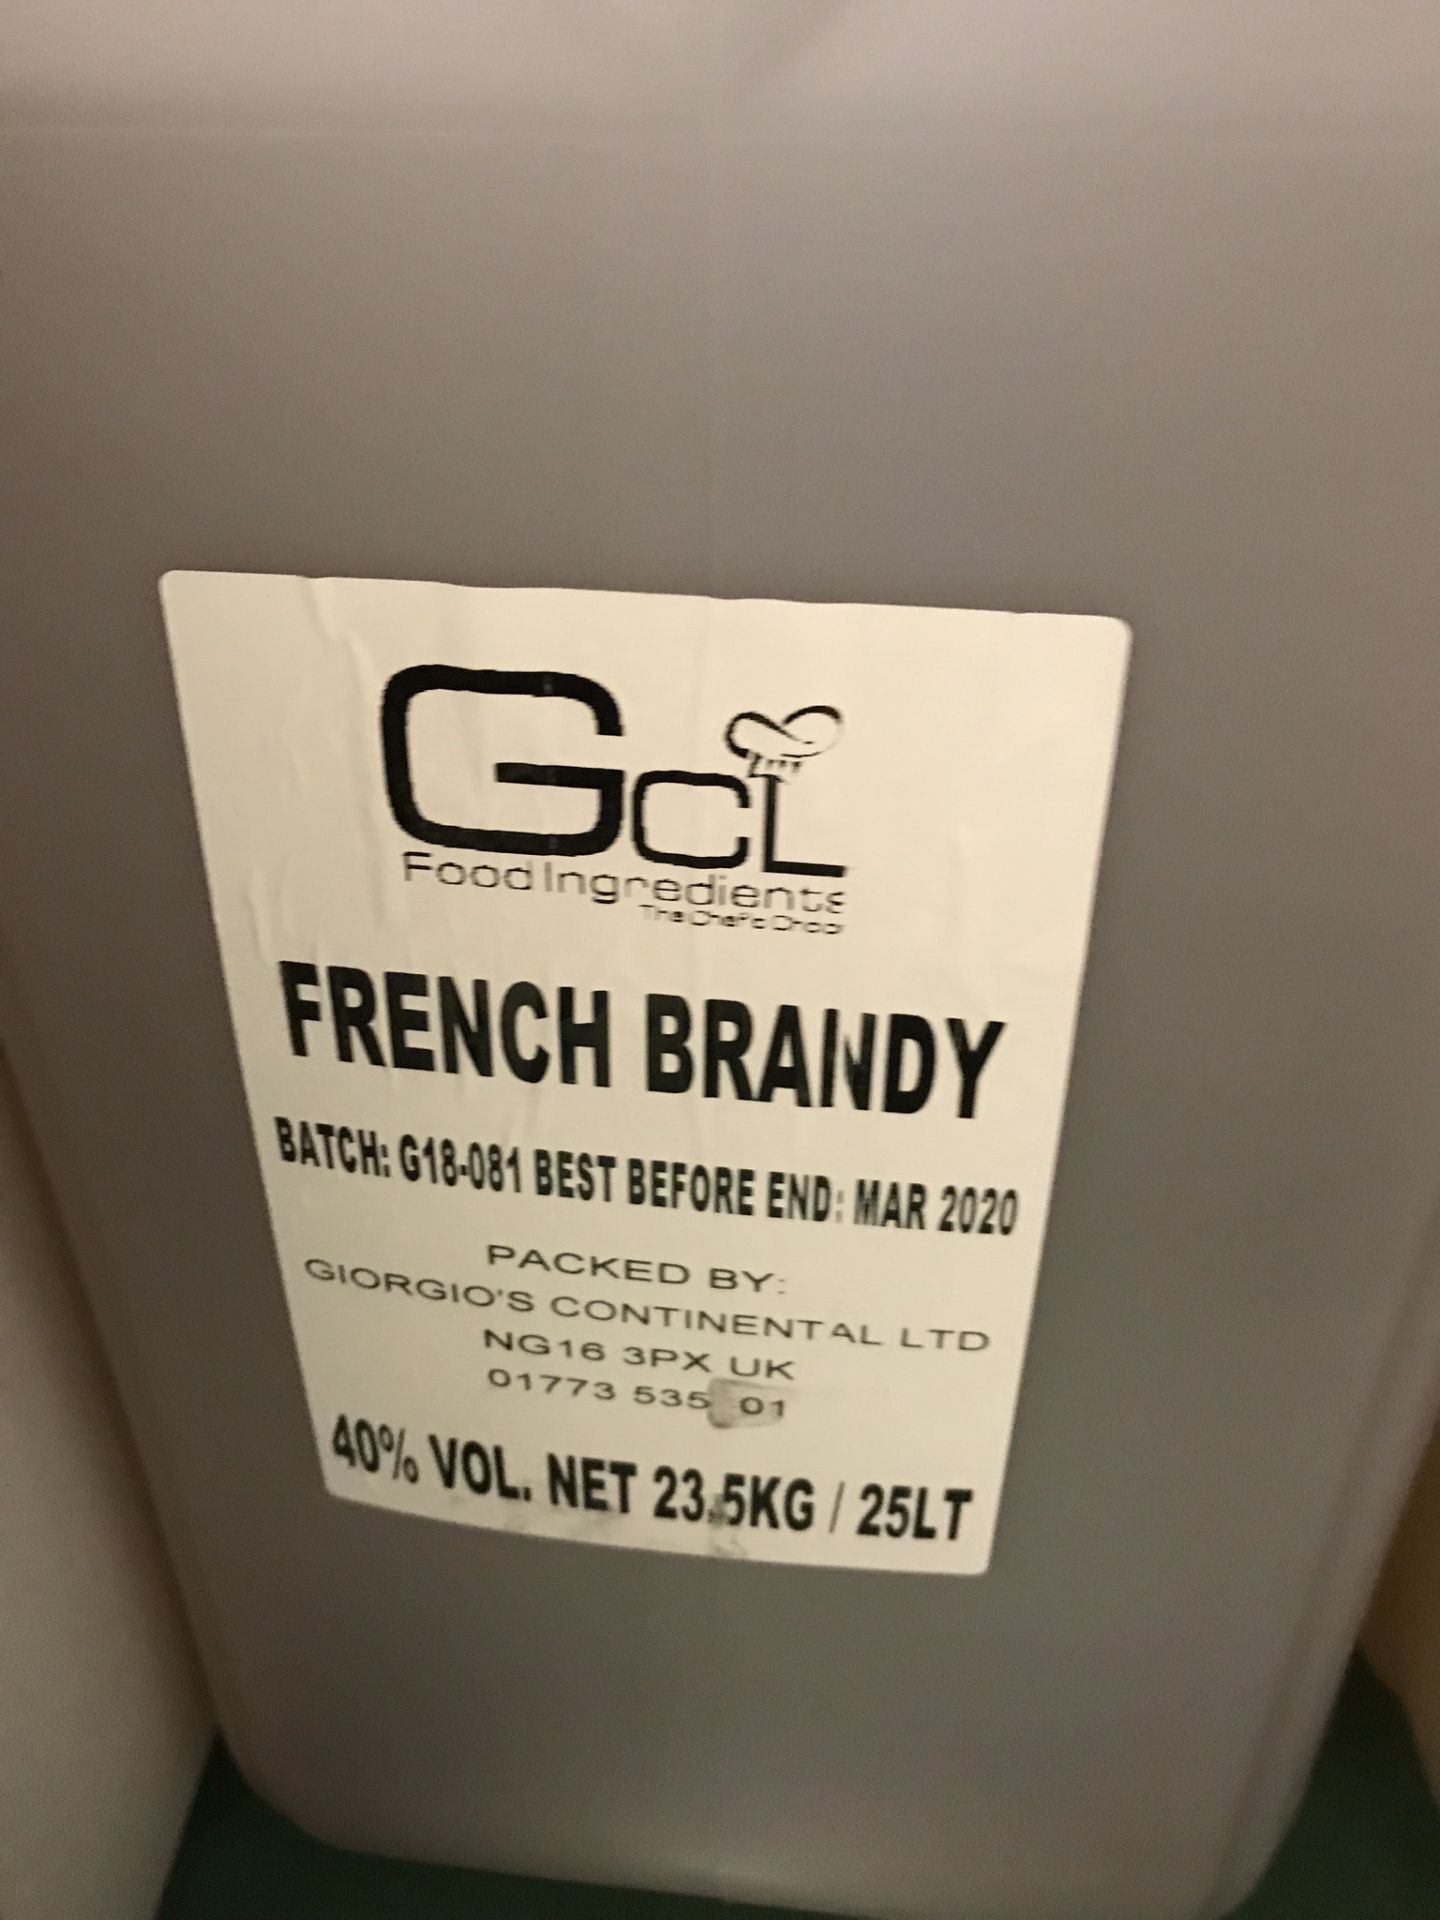 4 x 25LT GCL French Brandy - BBE: 03/2020 - Image 3 of 5